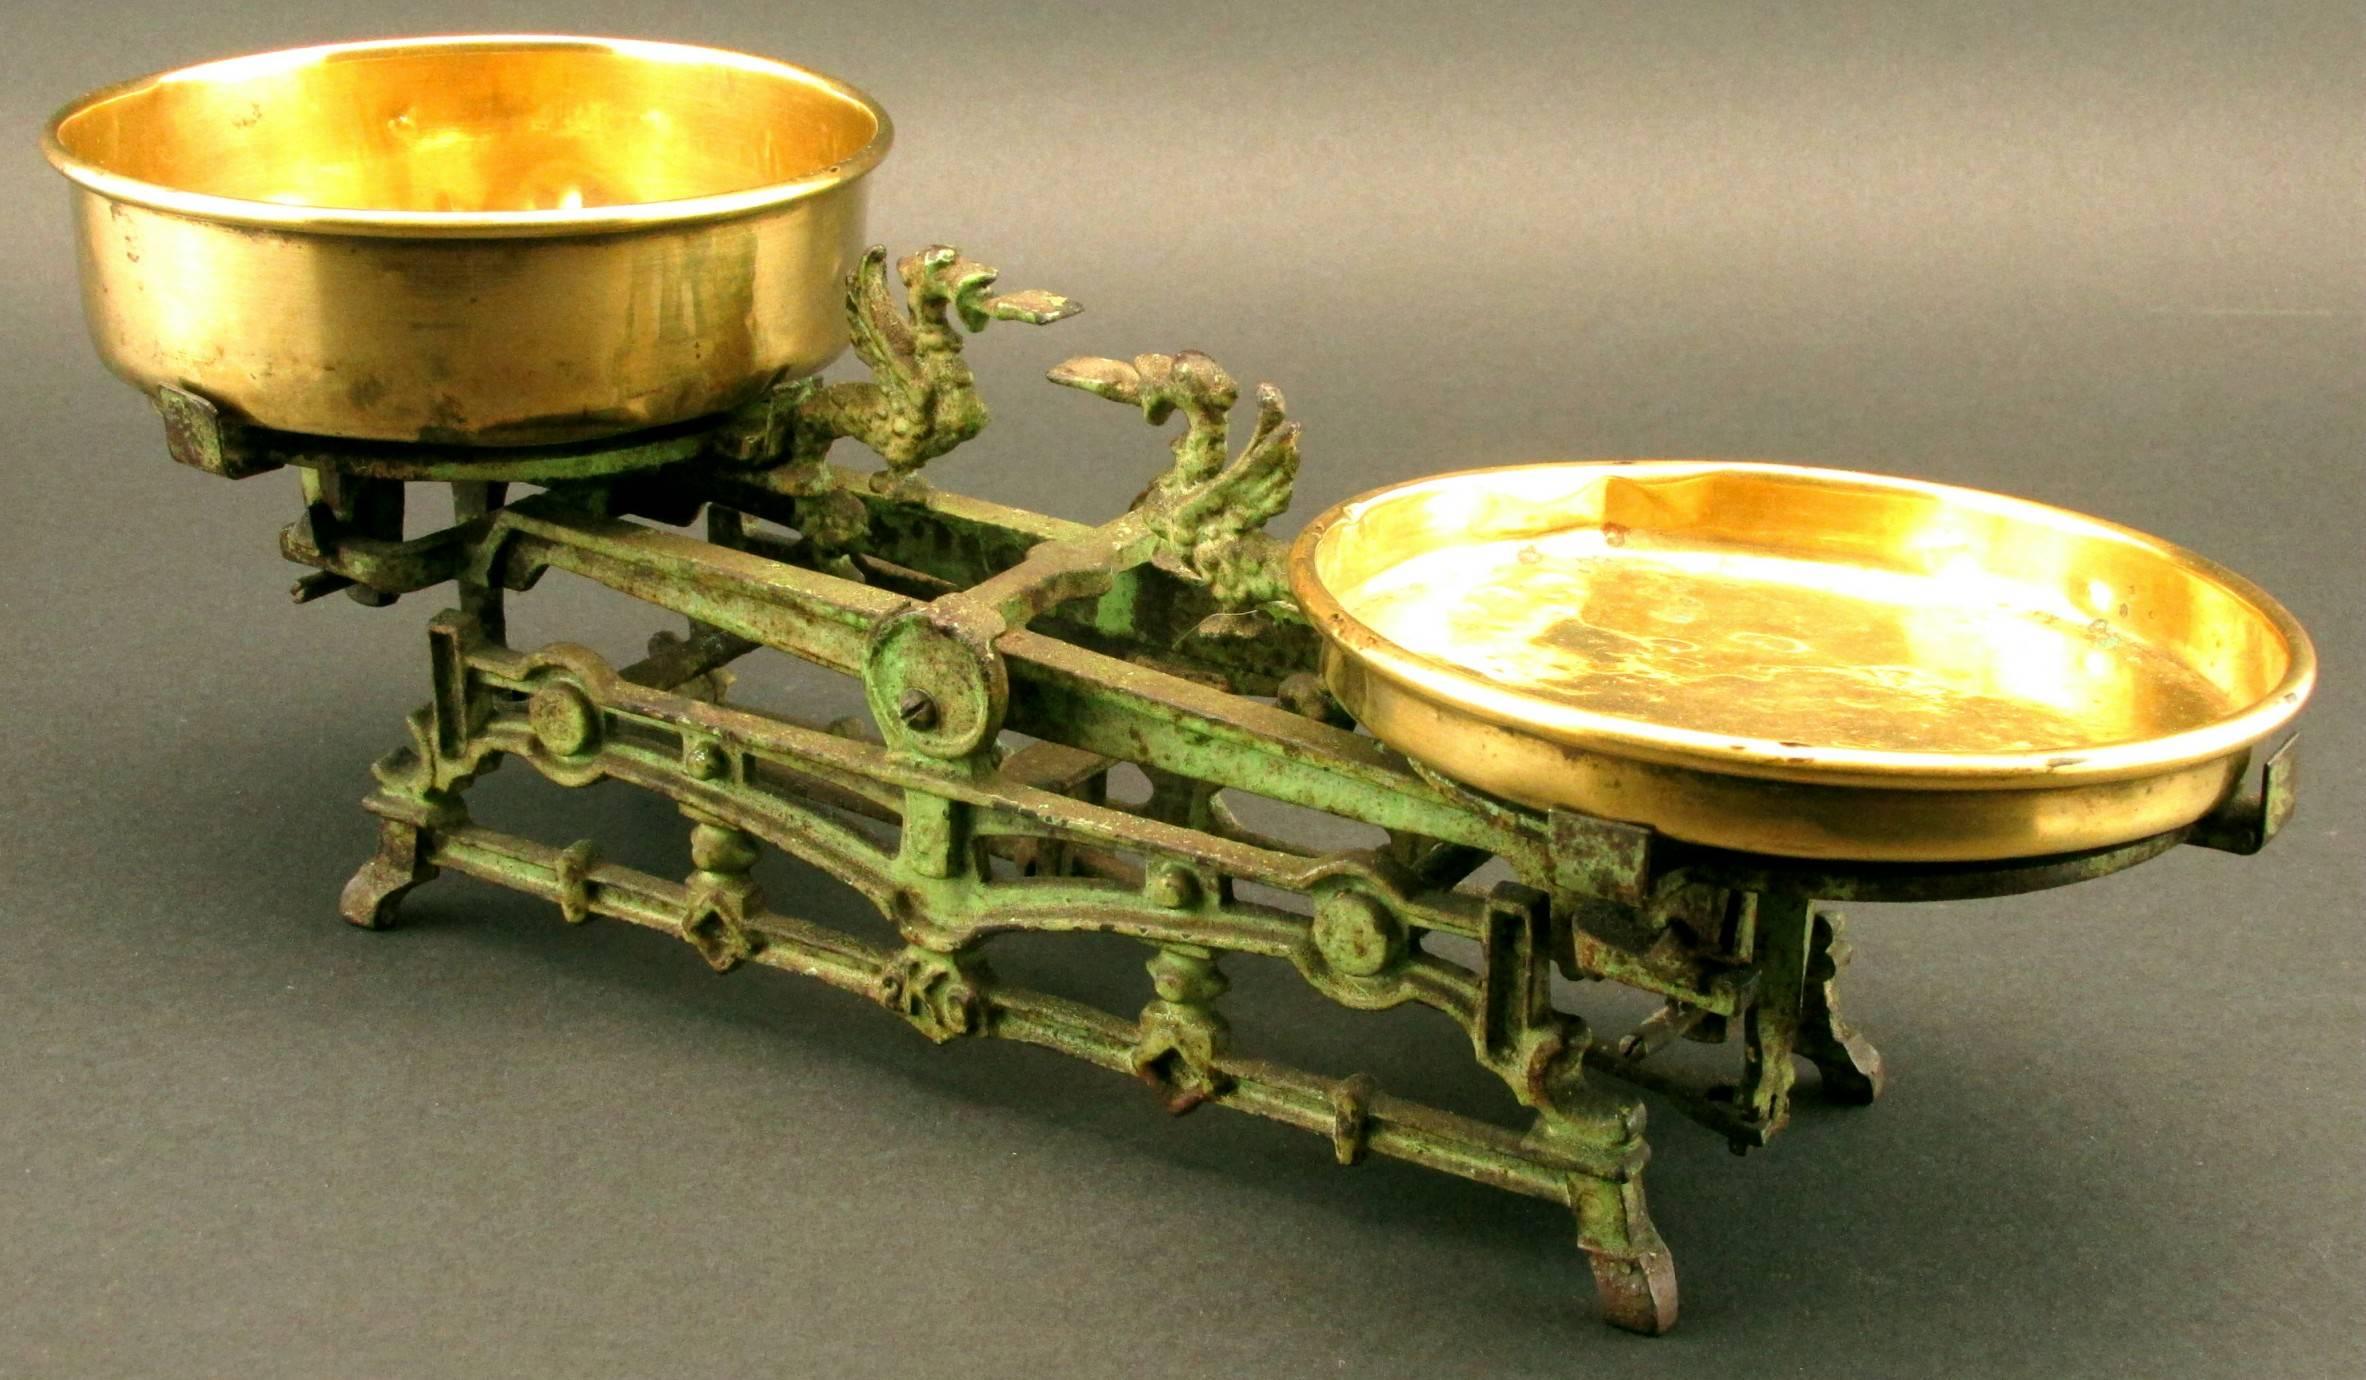 A very charming accent piece in original green paint and retaining both original brass weigh pans.